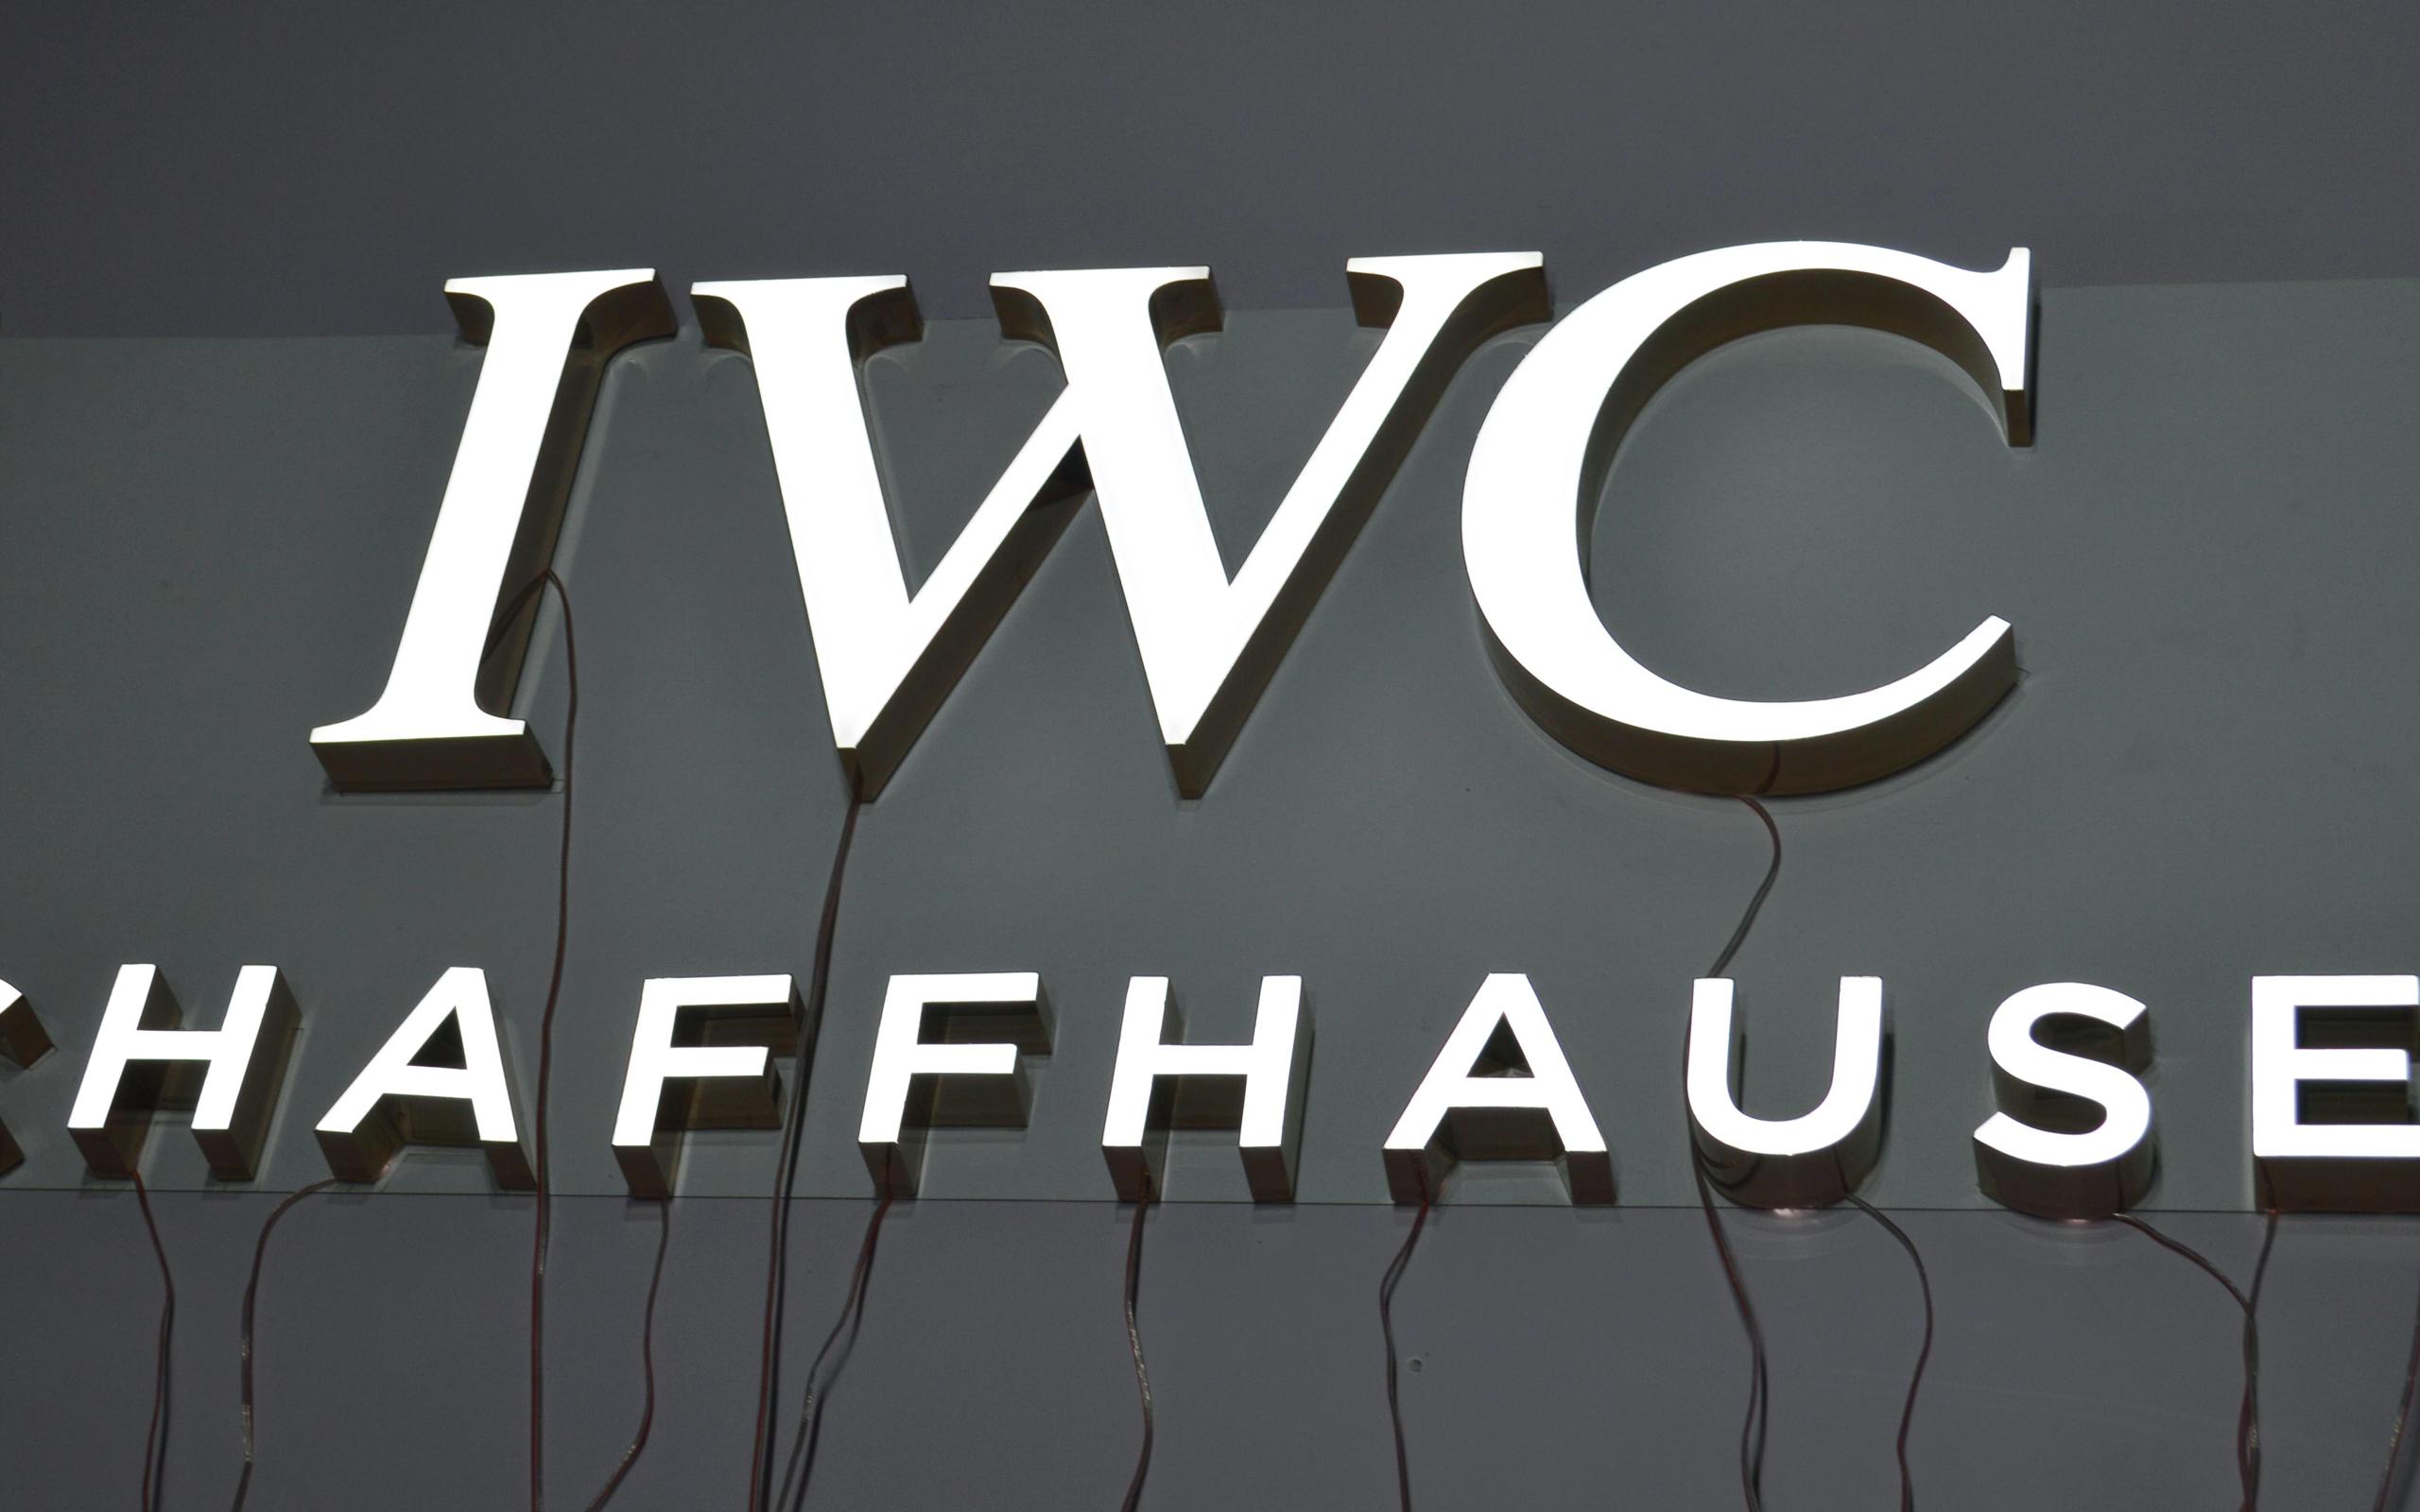 iwc-clean-white-illuminated-letters